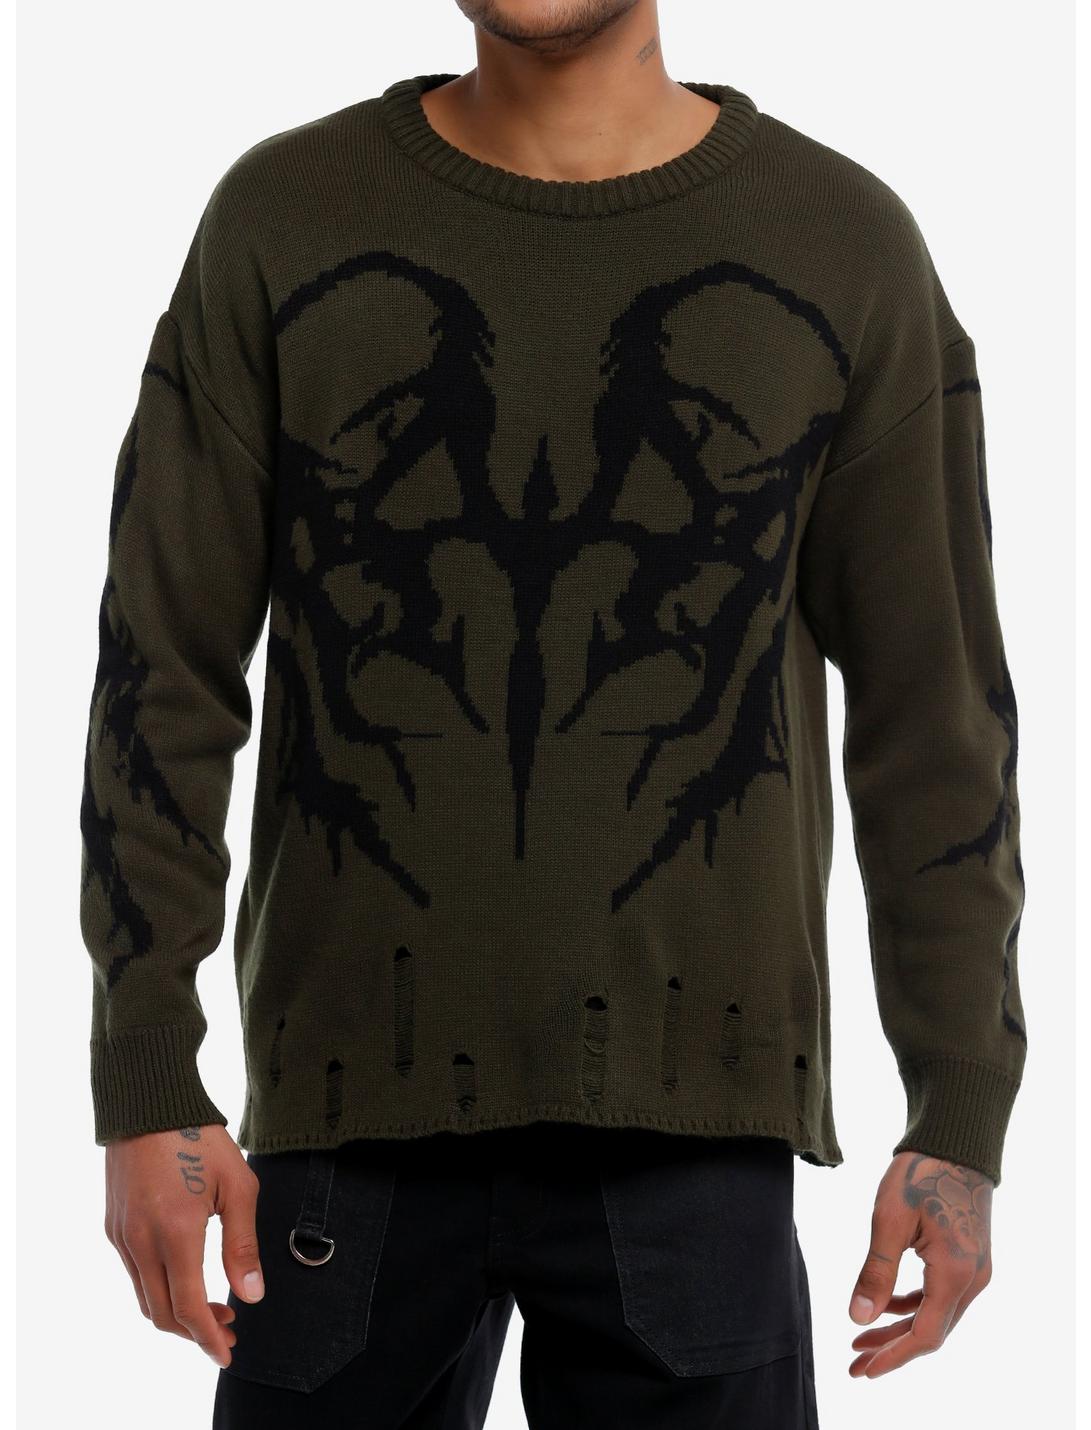 Green & Black Thorn Distressed Knit Sweater, GREEN, hi-res